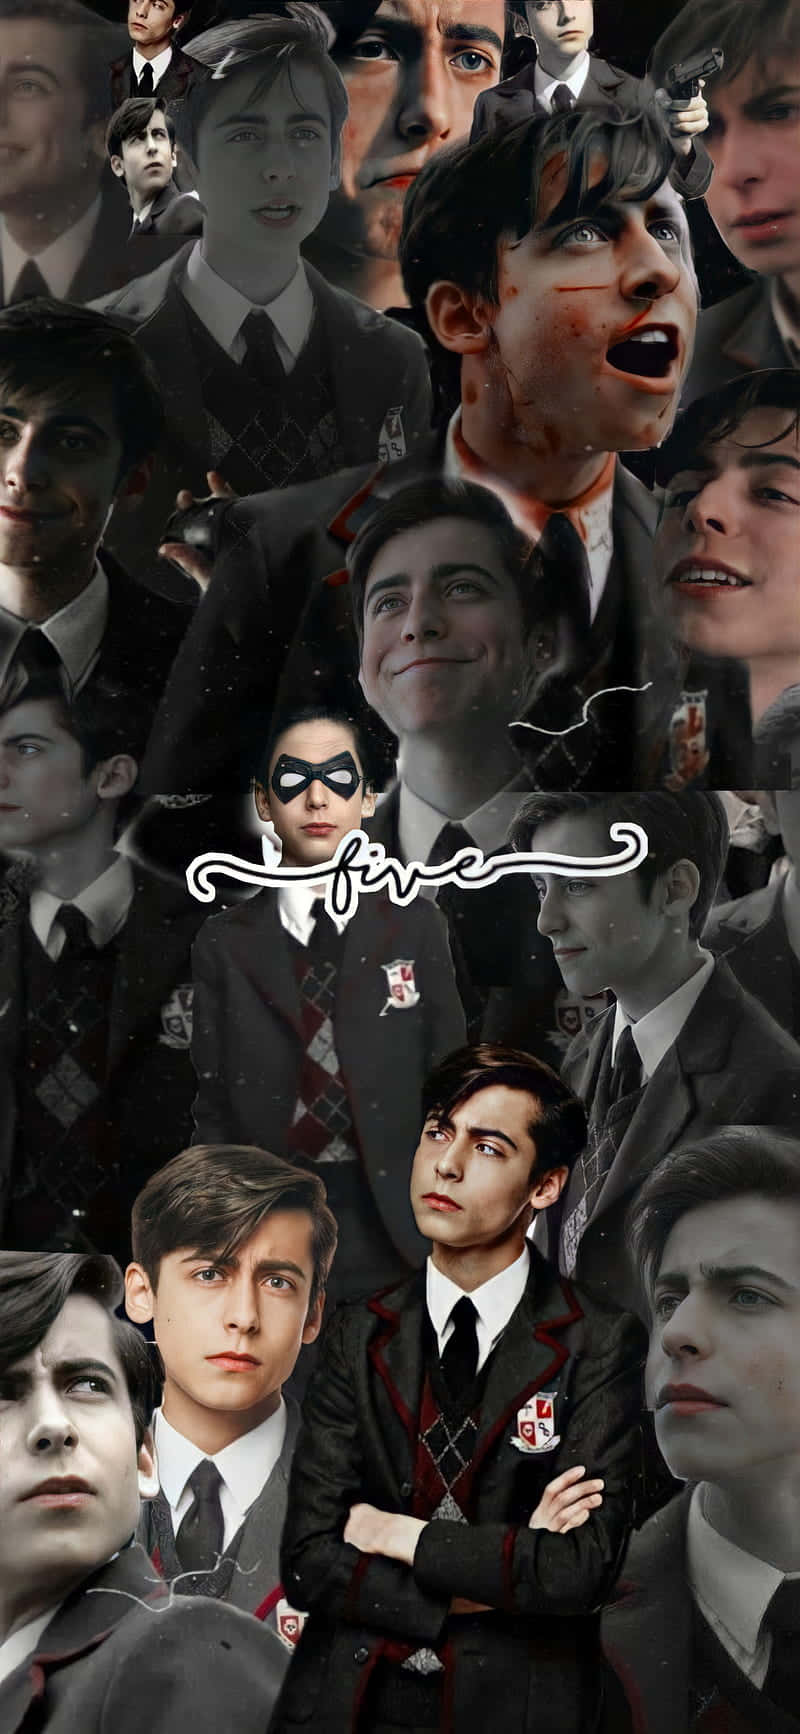 The Umbrella Academy's Five Hargreeves Wallpaper